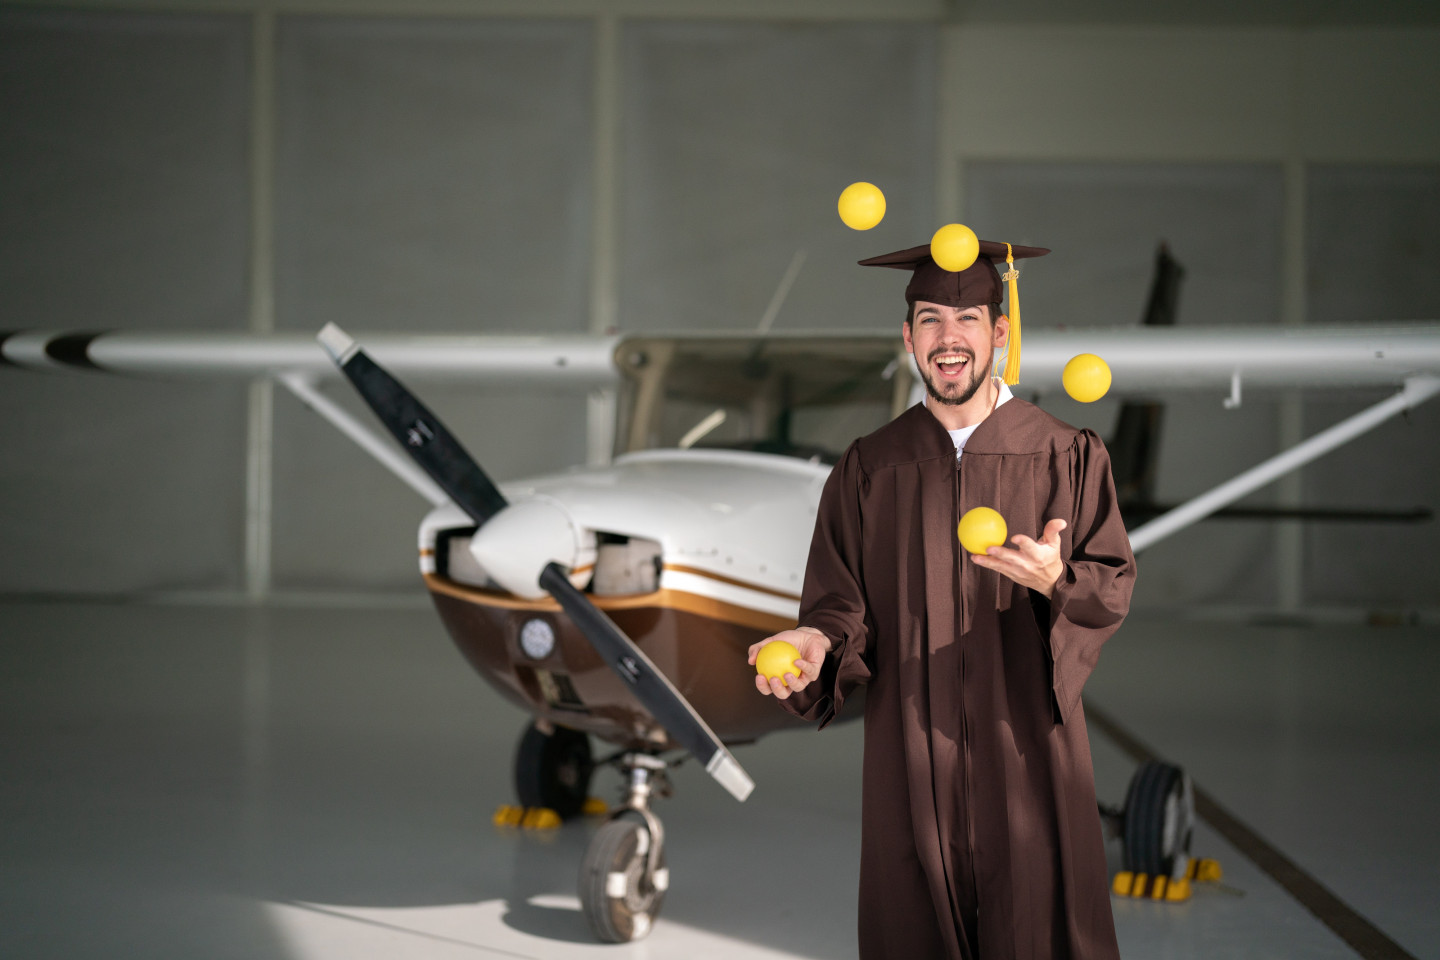 Kyle Albrecht juggles balls in front of an airplane.